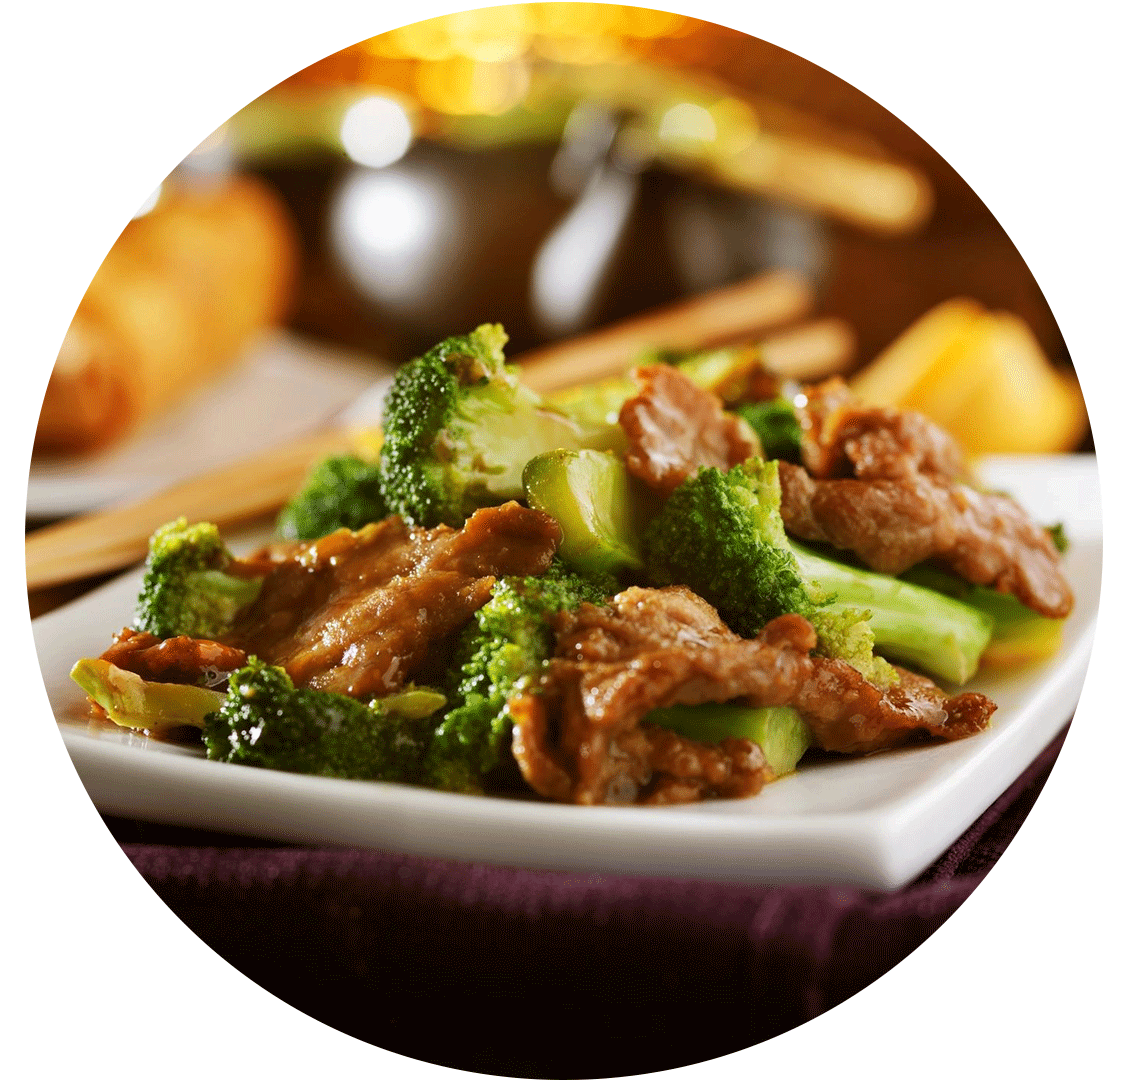 A plate of food with broccoli and meat.